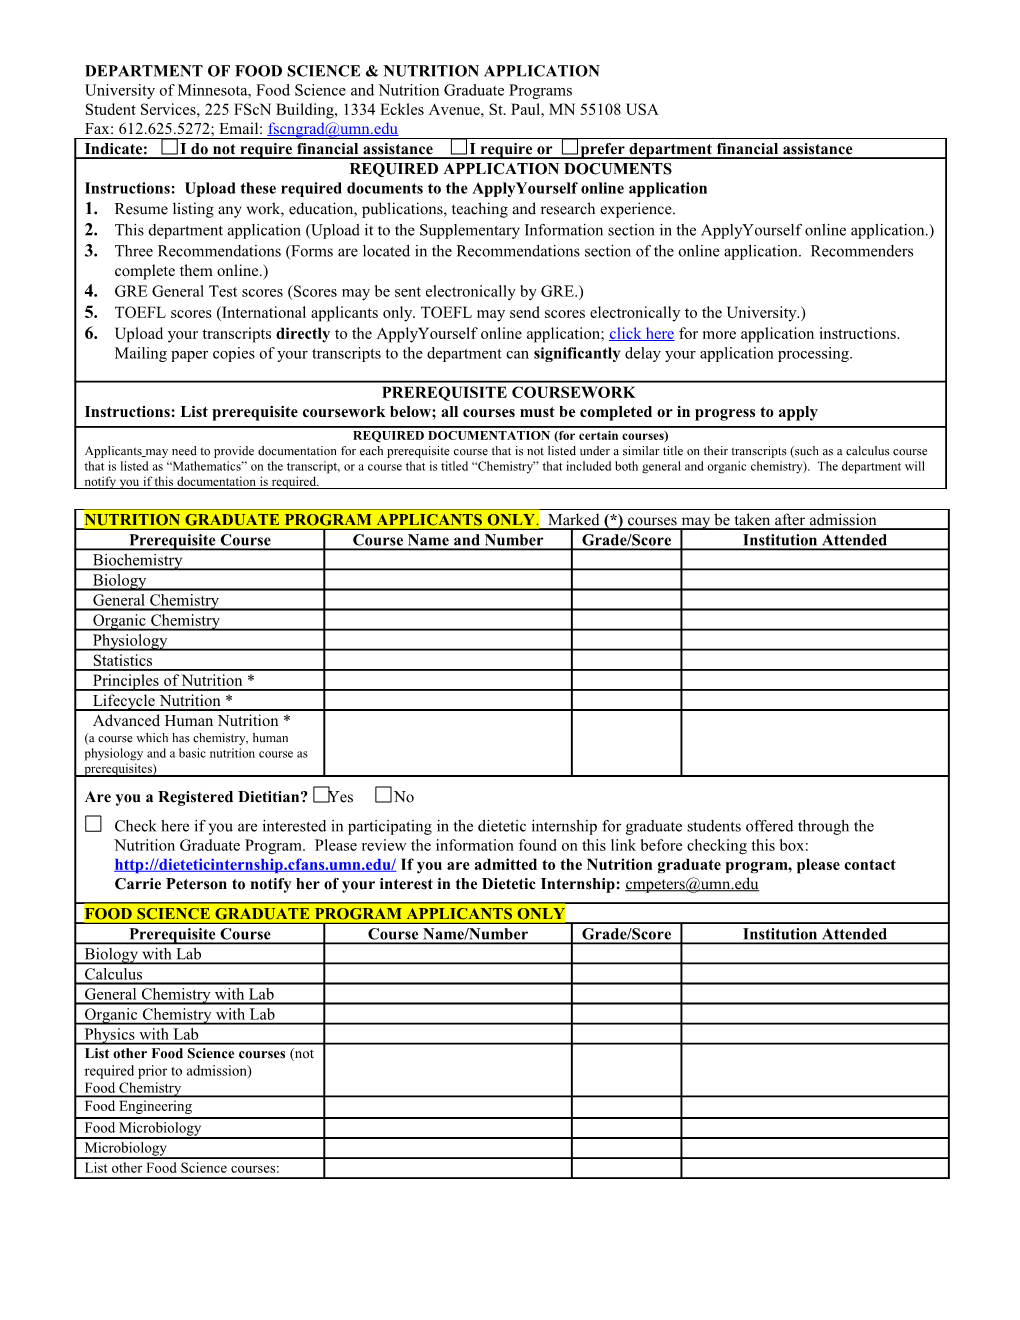 Department of Food Science and Nutrition (Fscn) Application Form